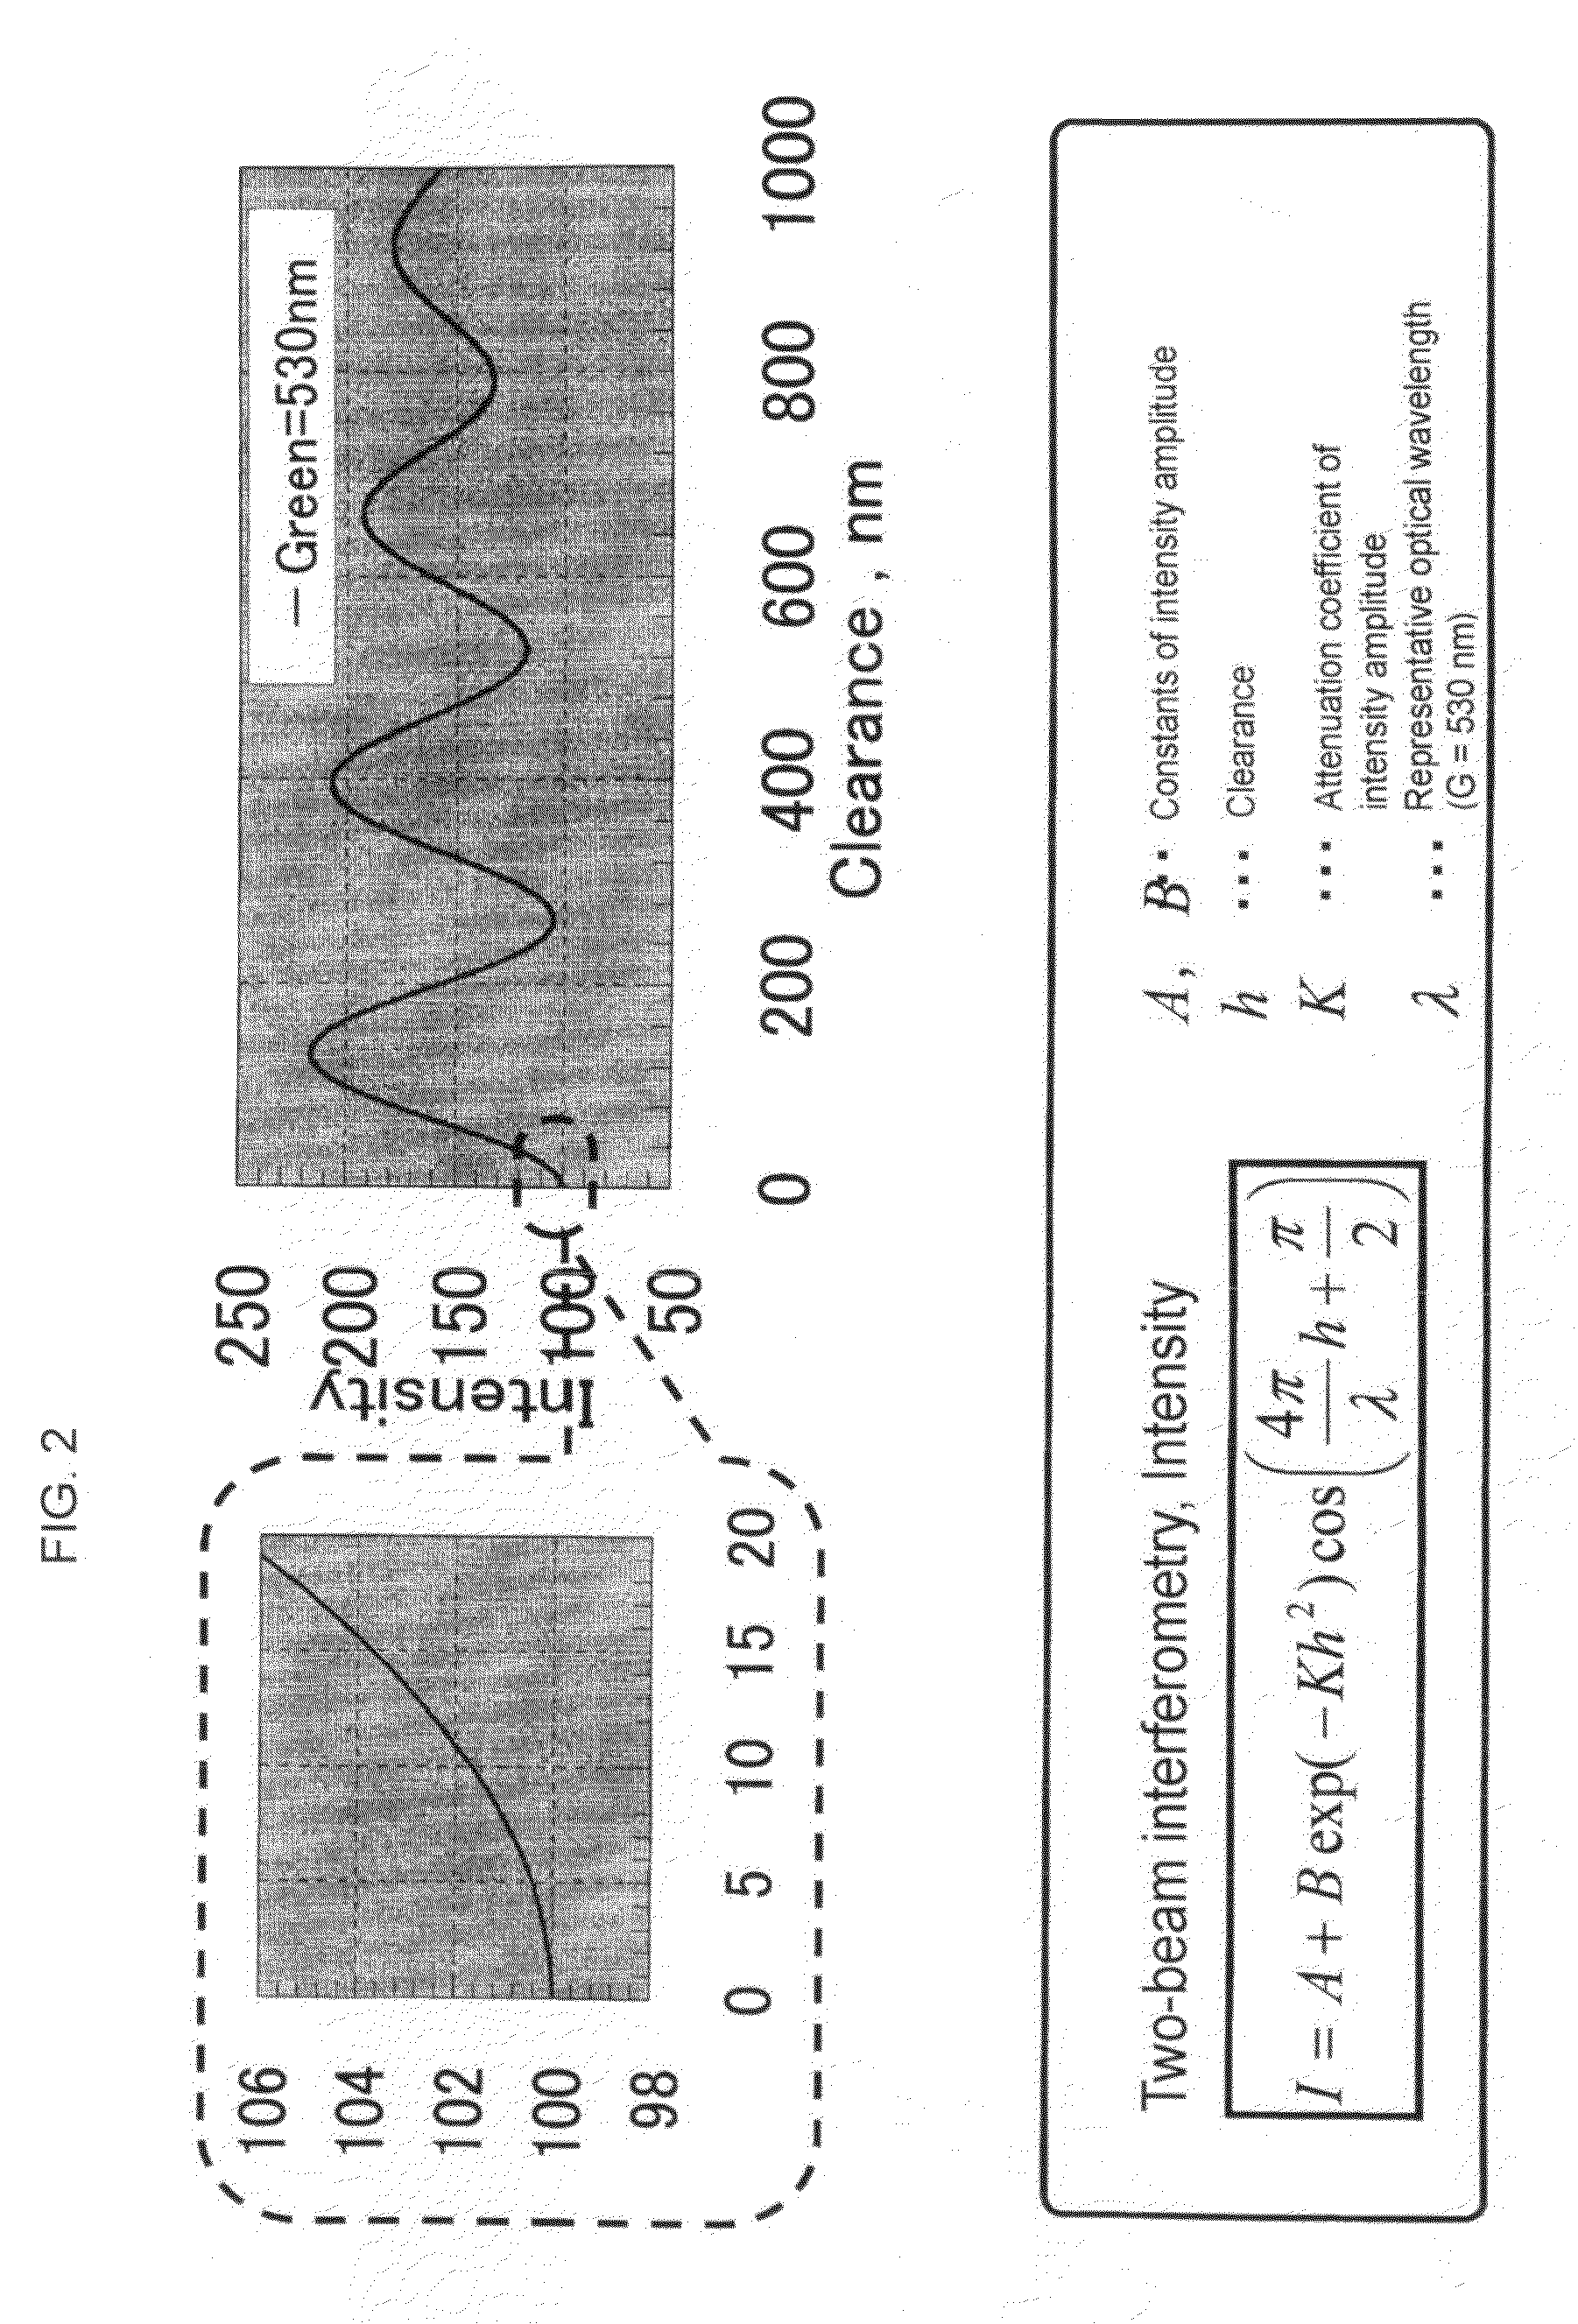 Contact area measurement device and method for measuring contact area